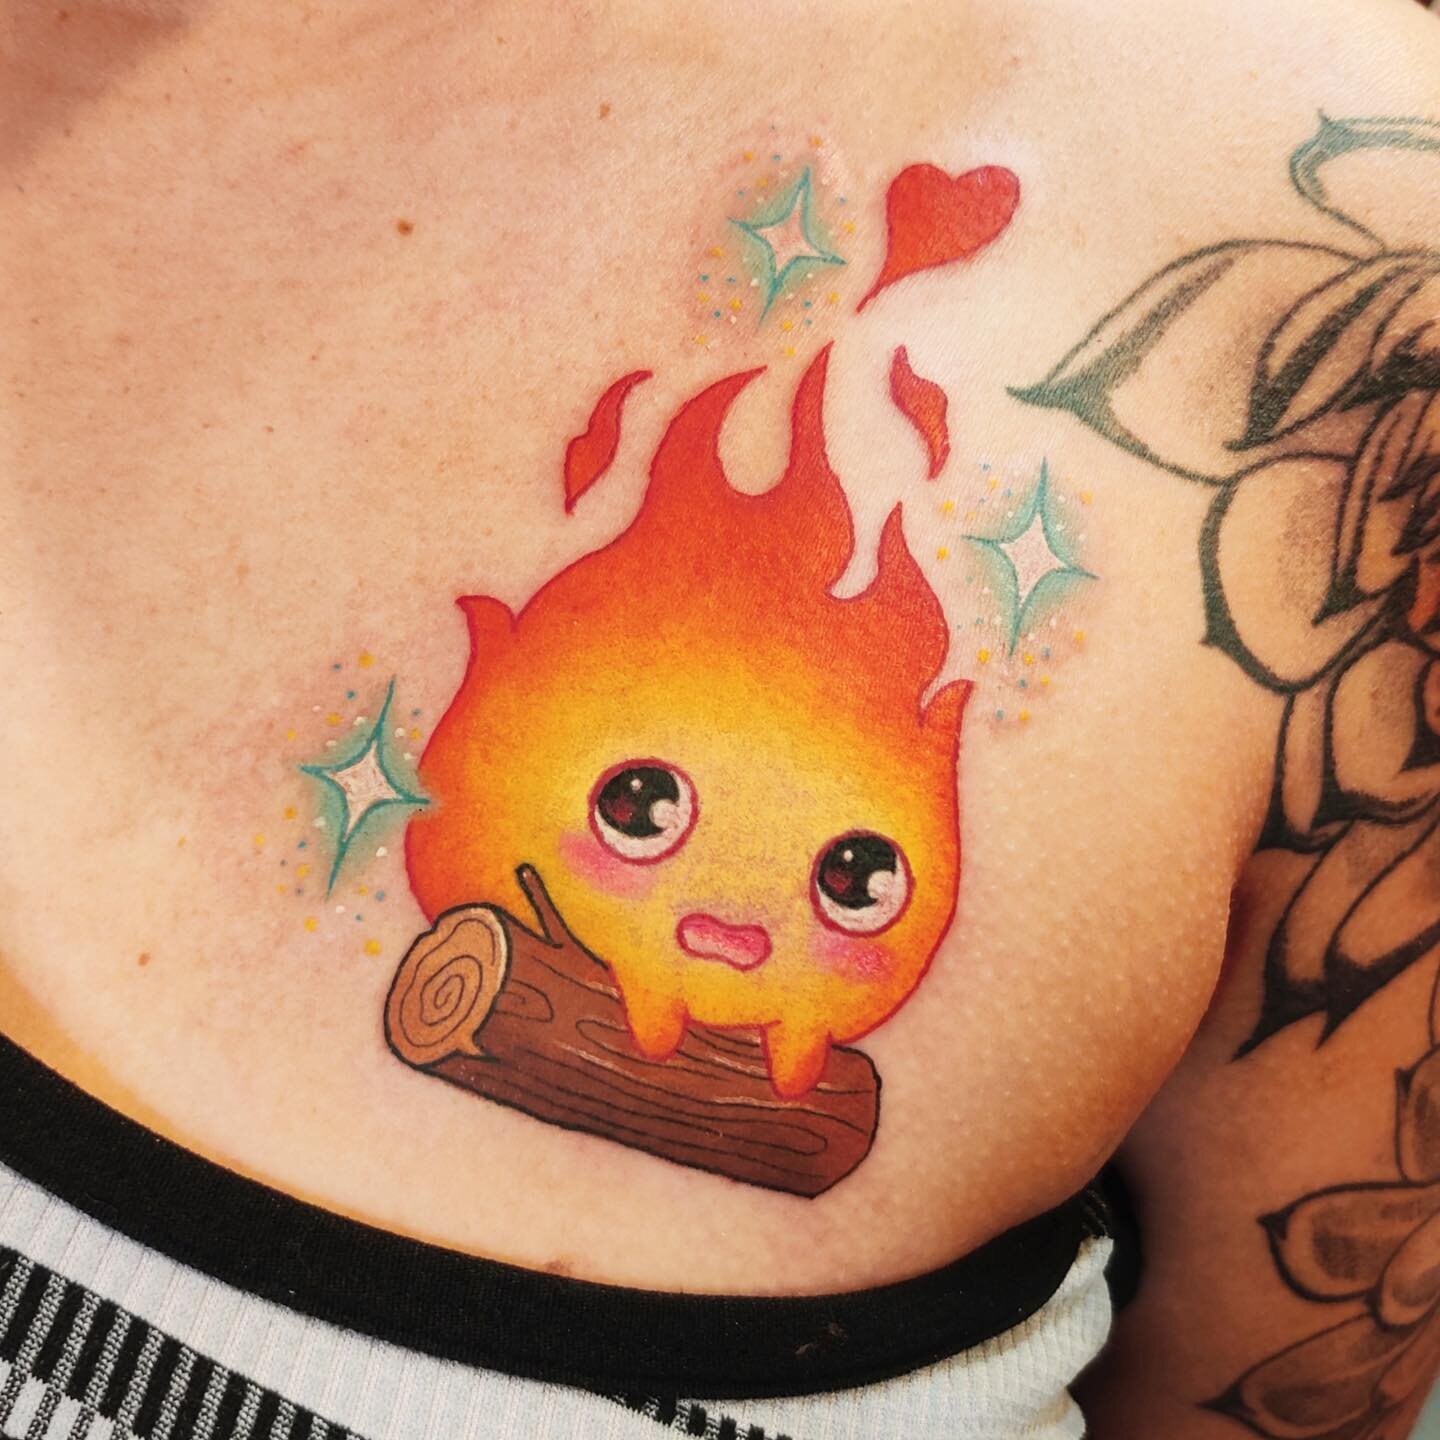 🔥 C A L C I F E R 🔥 
Yet another long ago tattoo that I&rsquo;m finally posting. (Though I swear my last post was a recent one). We got ourselves a super cute flamy boi from everyone&rsquo;s favorite anime movie!! Thank you @pass_the_rum 

@eternal